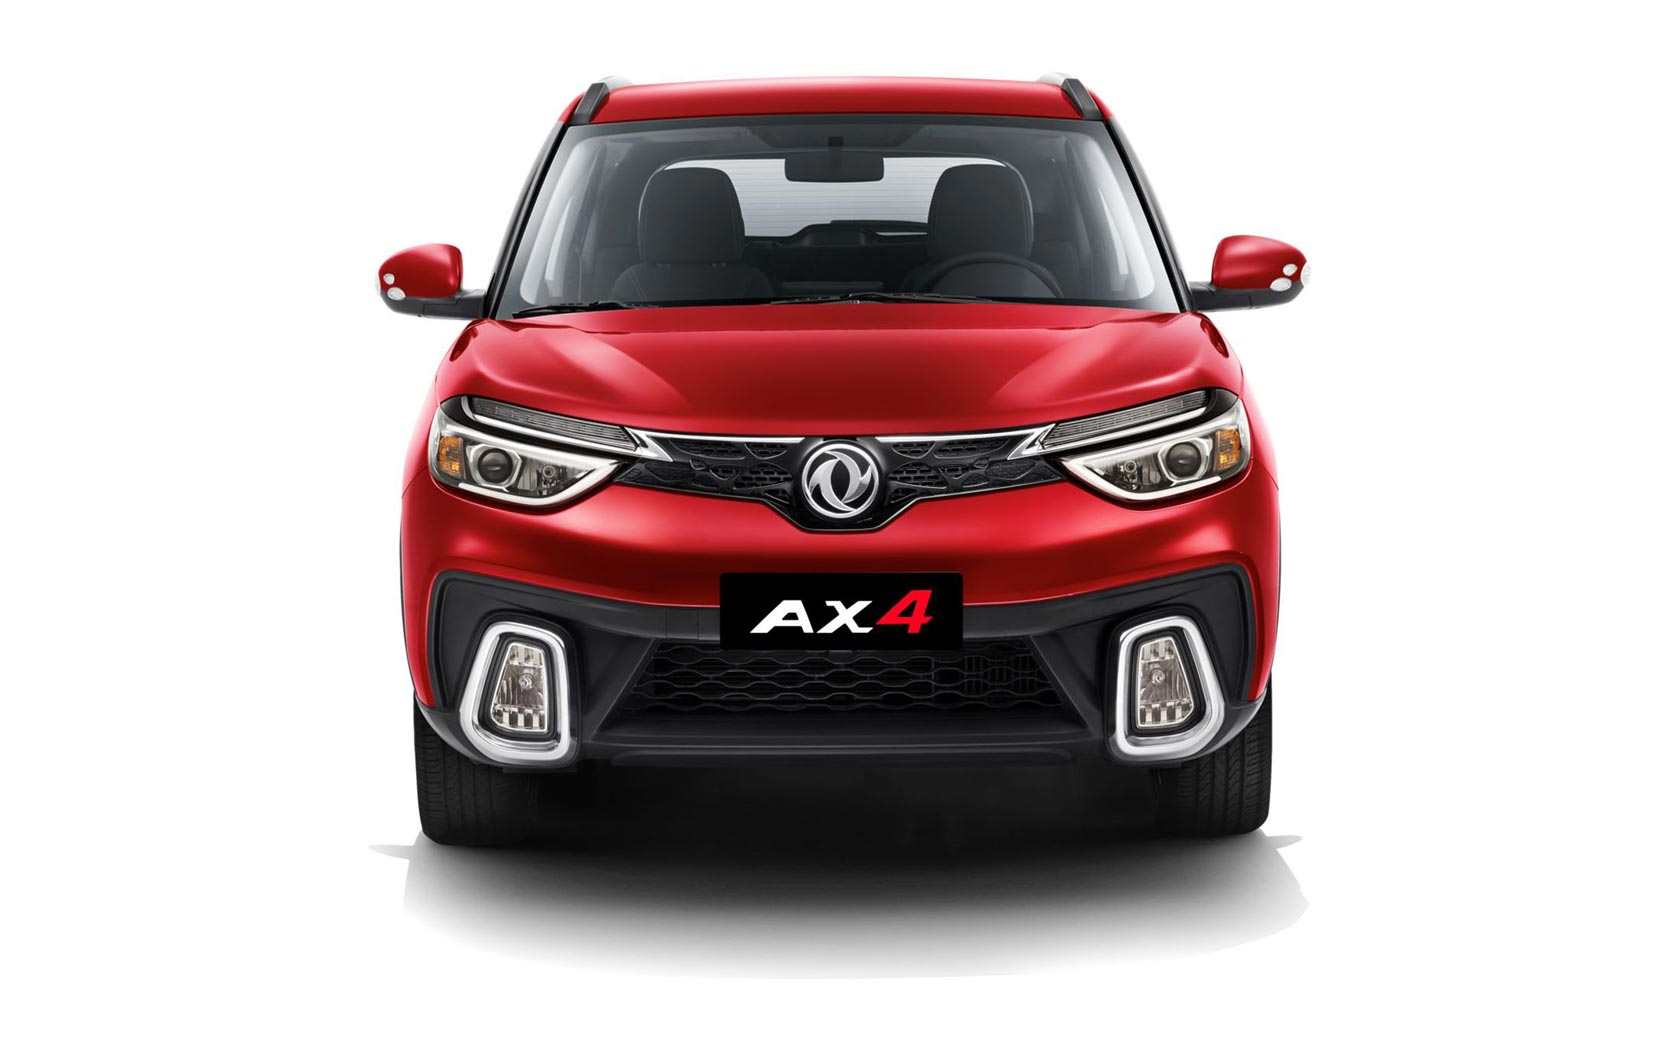  DongFeng AX4 